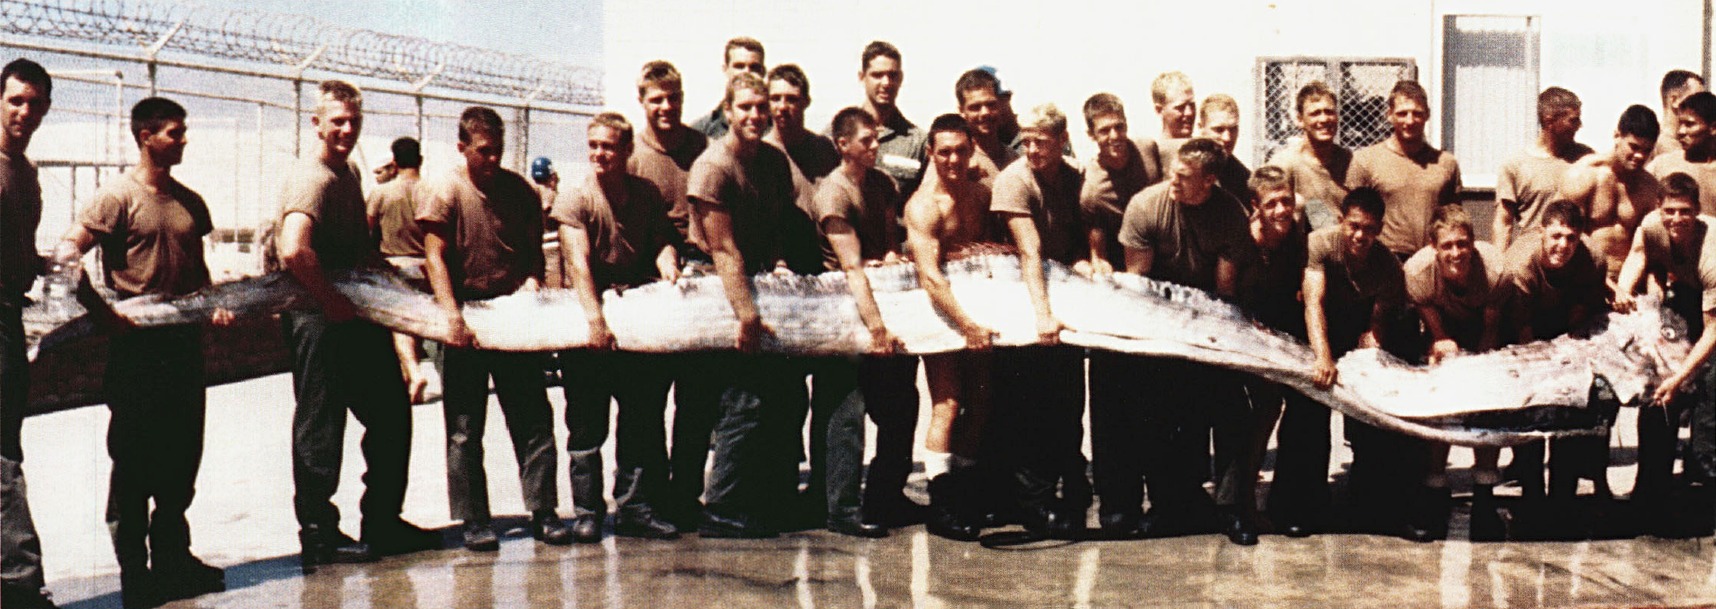 United States Navy SEALS holding a 23-foot (7.0 m) giant oarfish, found washed up on the shore near San Diego, California, in September 1996